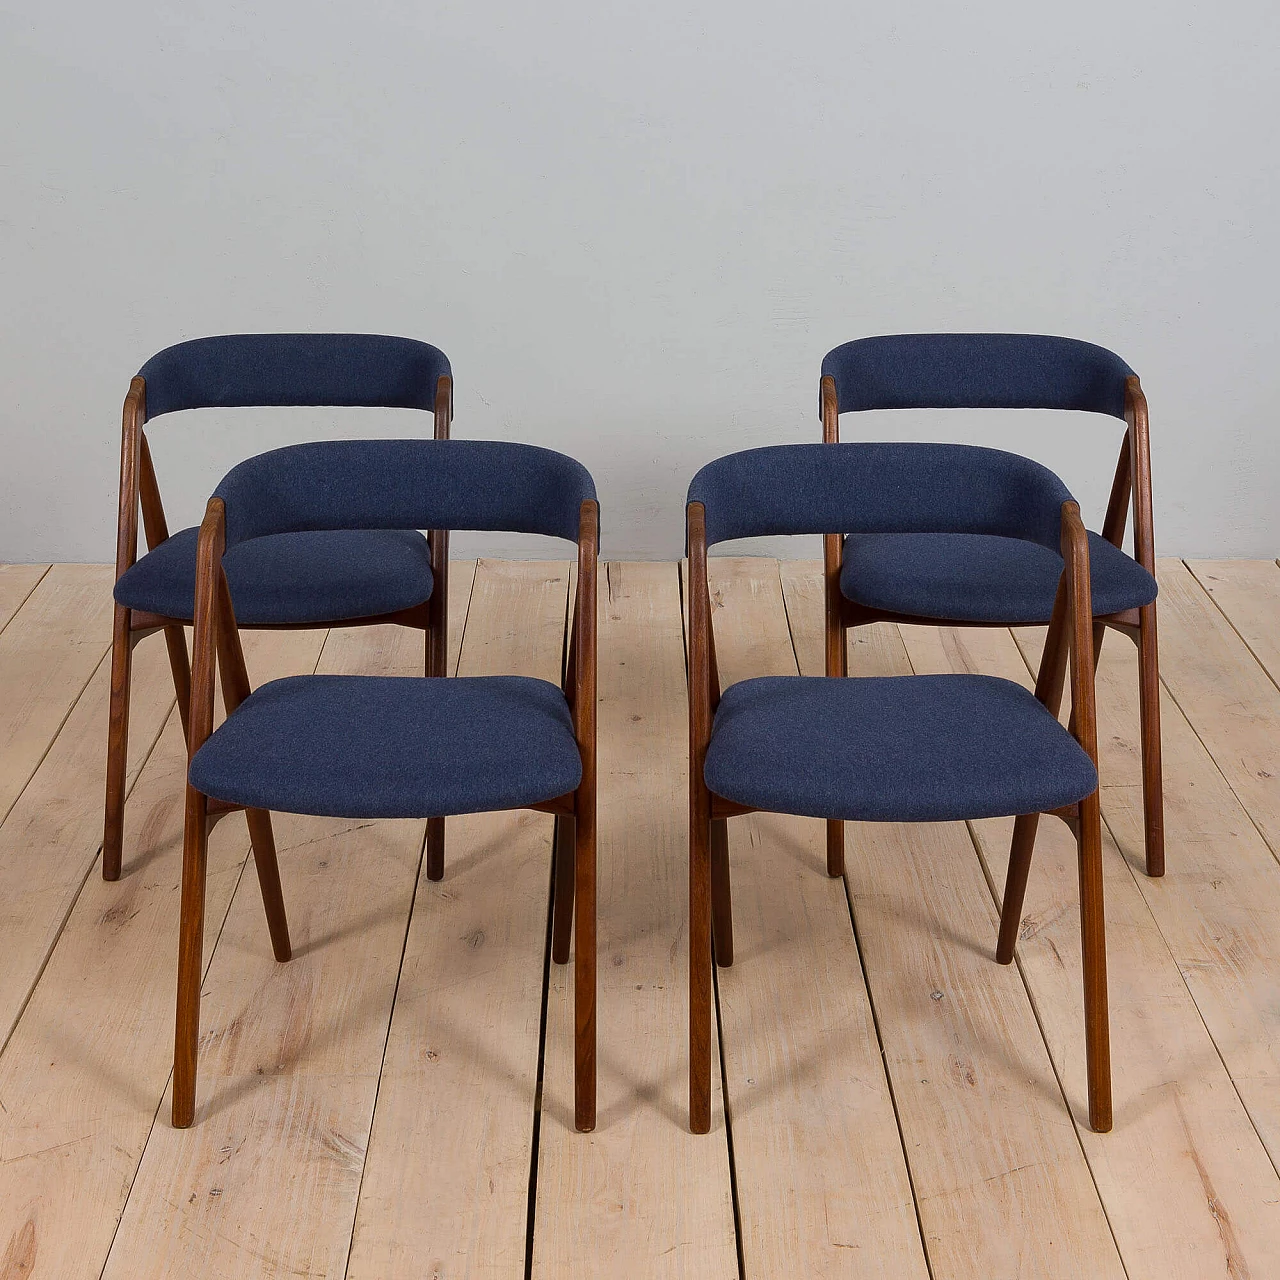 4 Chairs in teak by Thomas Harlev for Farstrup Møbler, 1950s 1